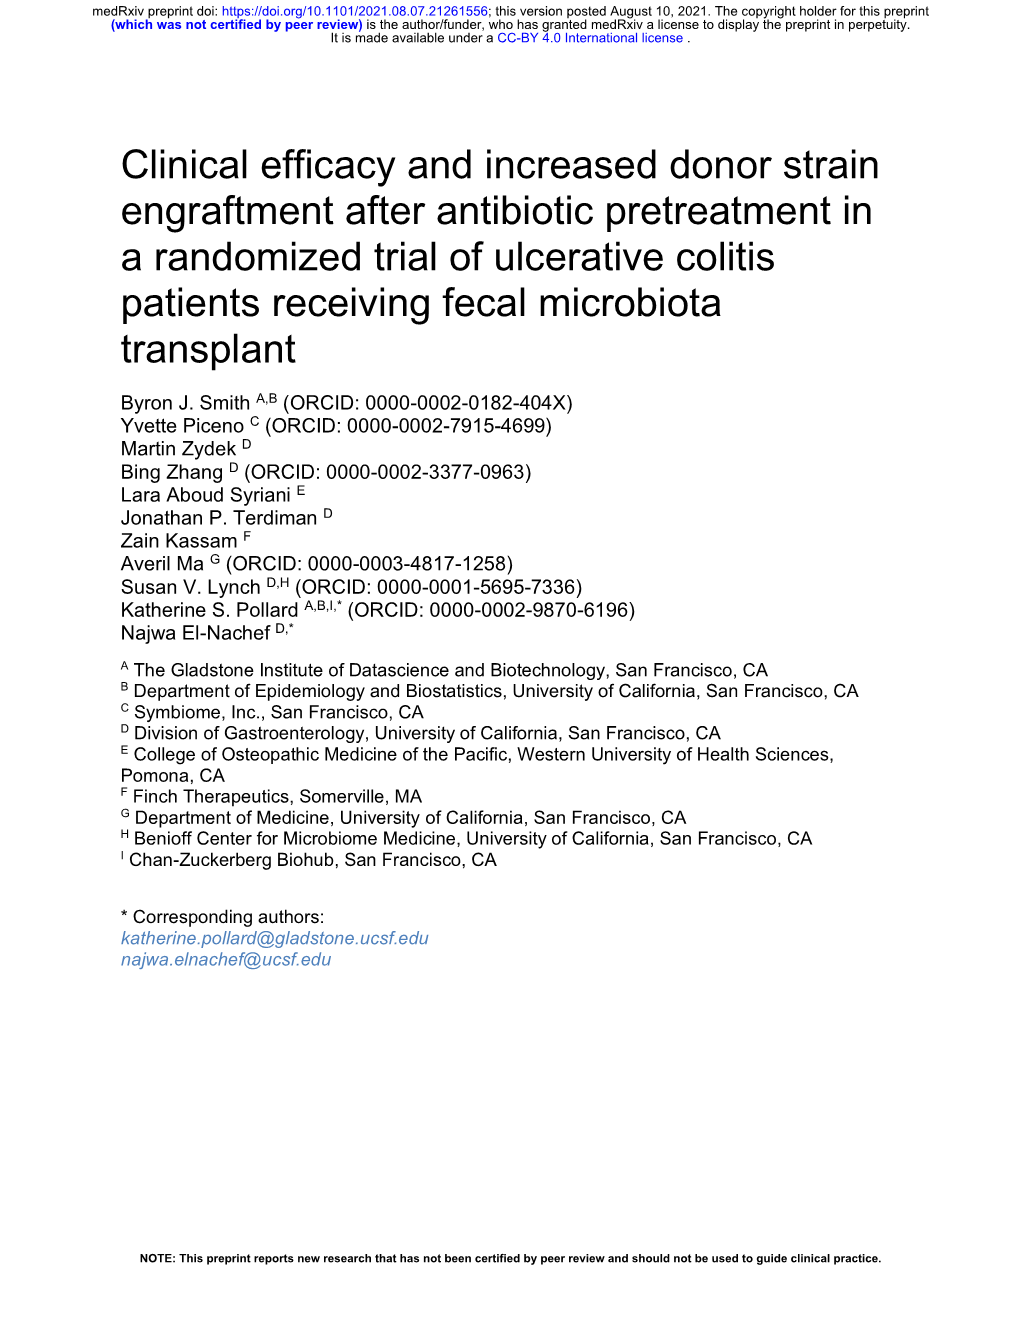 Clinical Efficacy and Increased Donor Strain Engraftment After Antibiotic